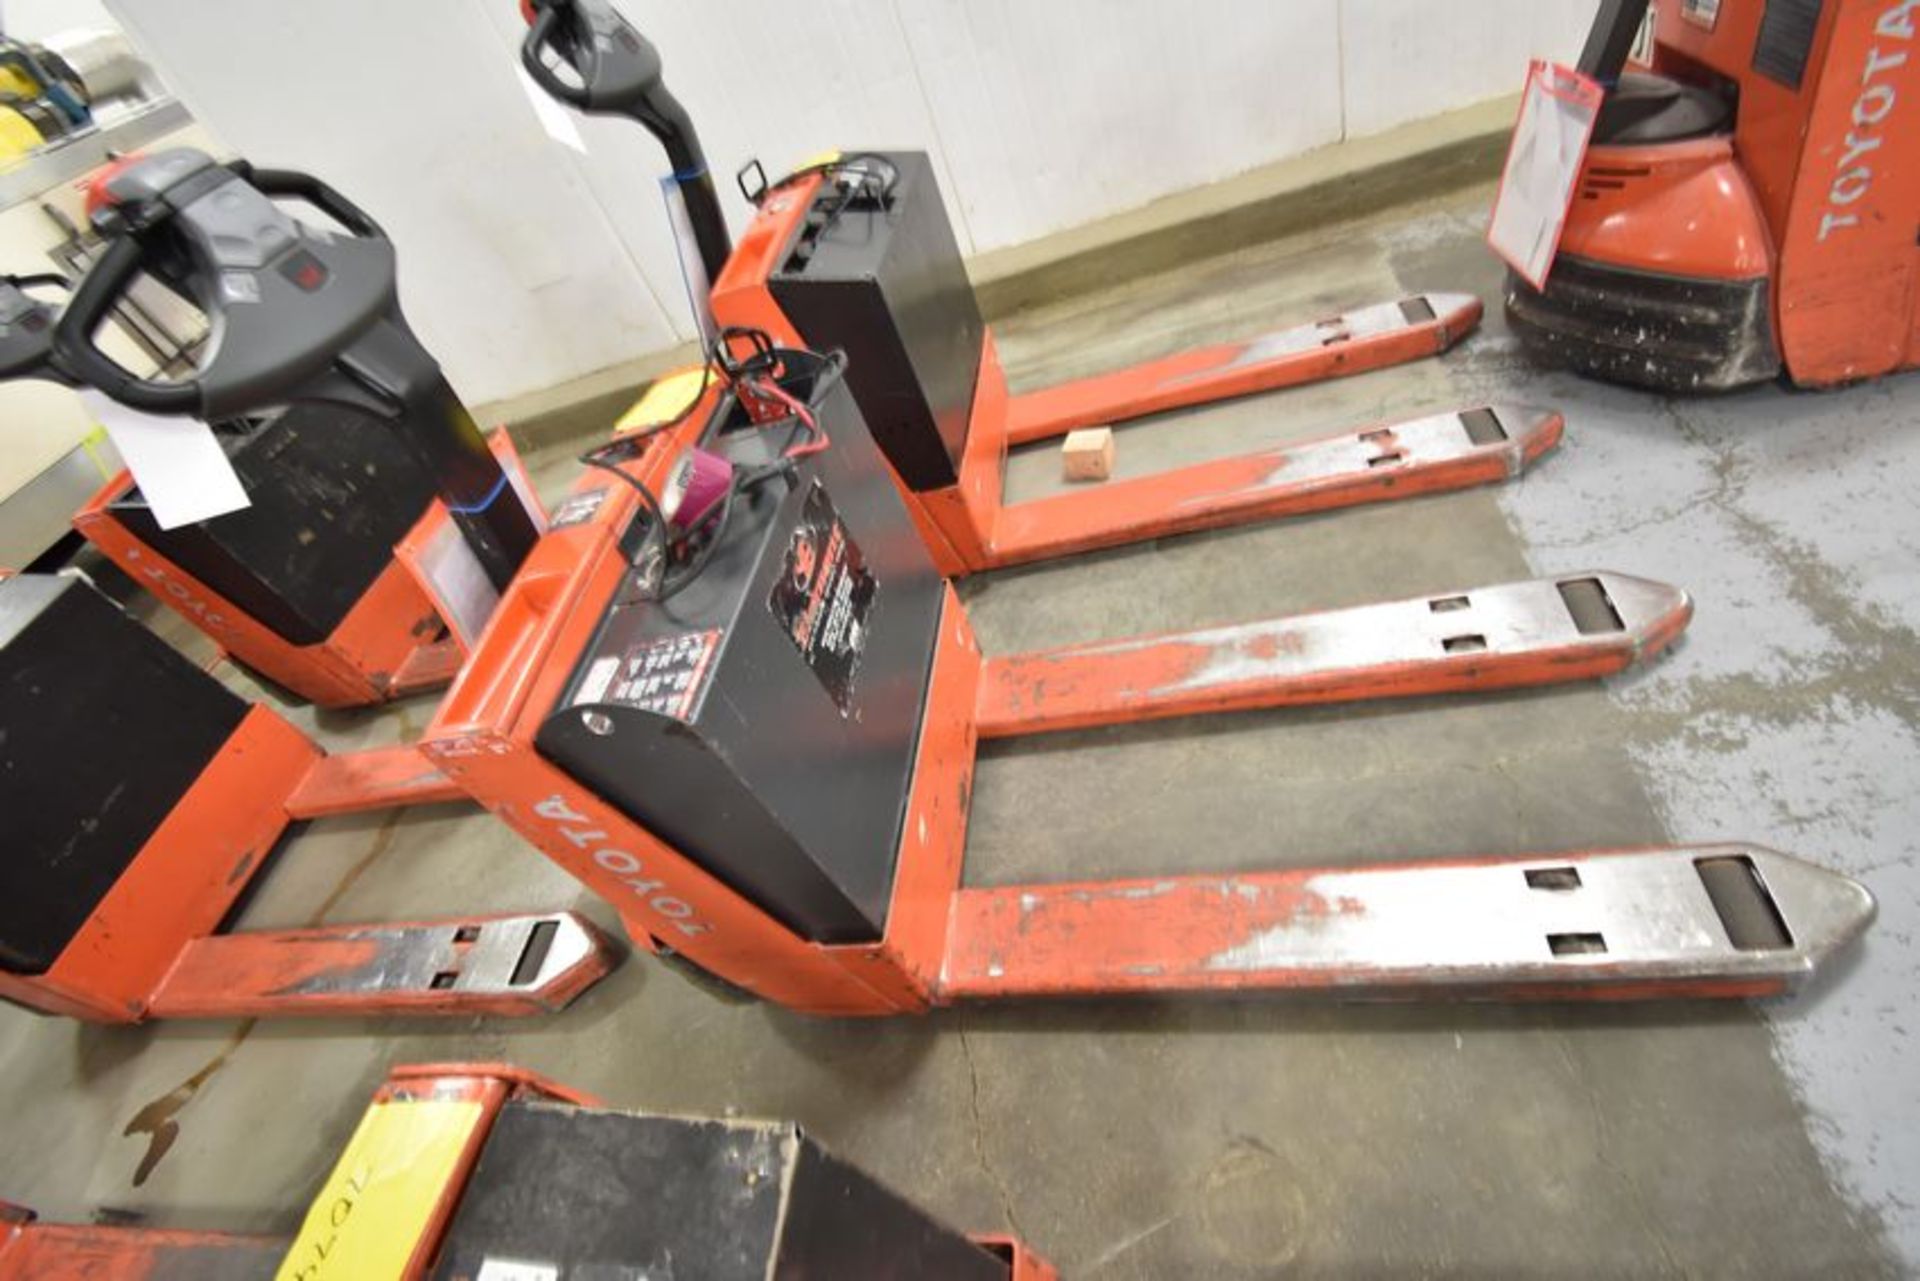 Toyota | Toyota Electric Pallet Jack Model 7HBW23, S/N 7HBW23-51620. 4500 lbs capacity, 24 volt ( - Image 3 of 3